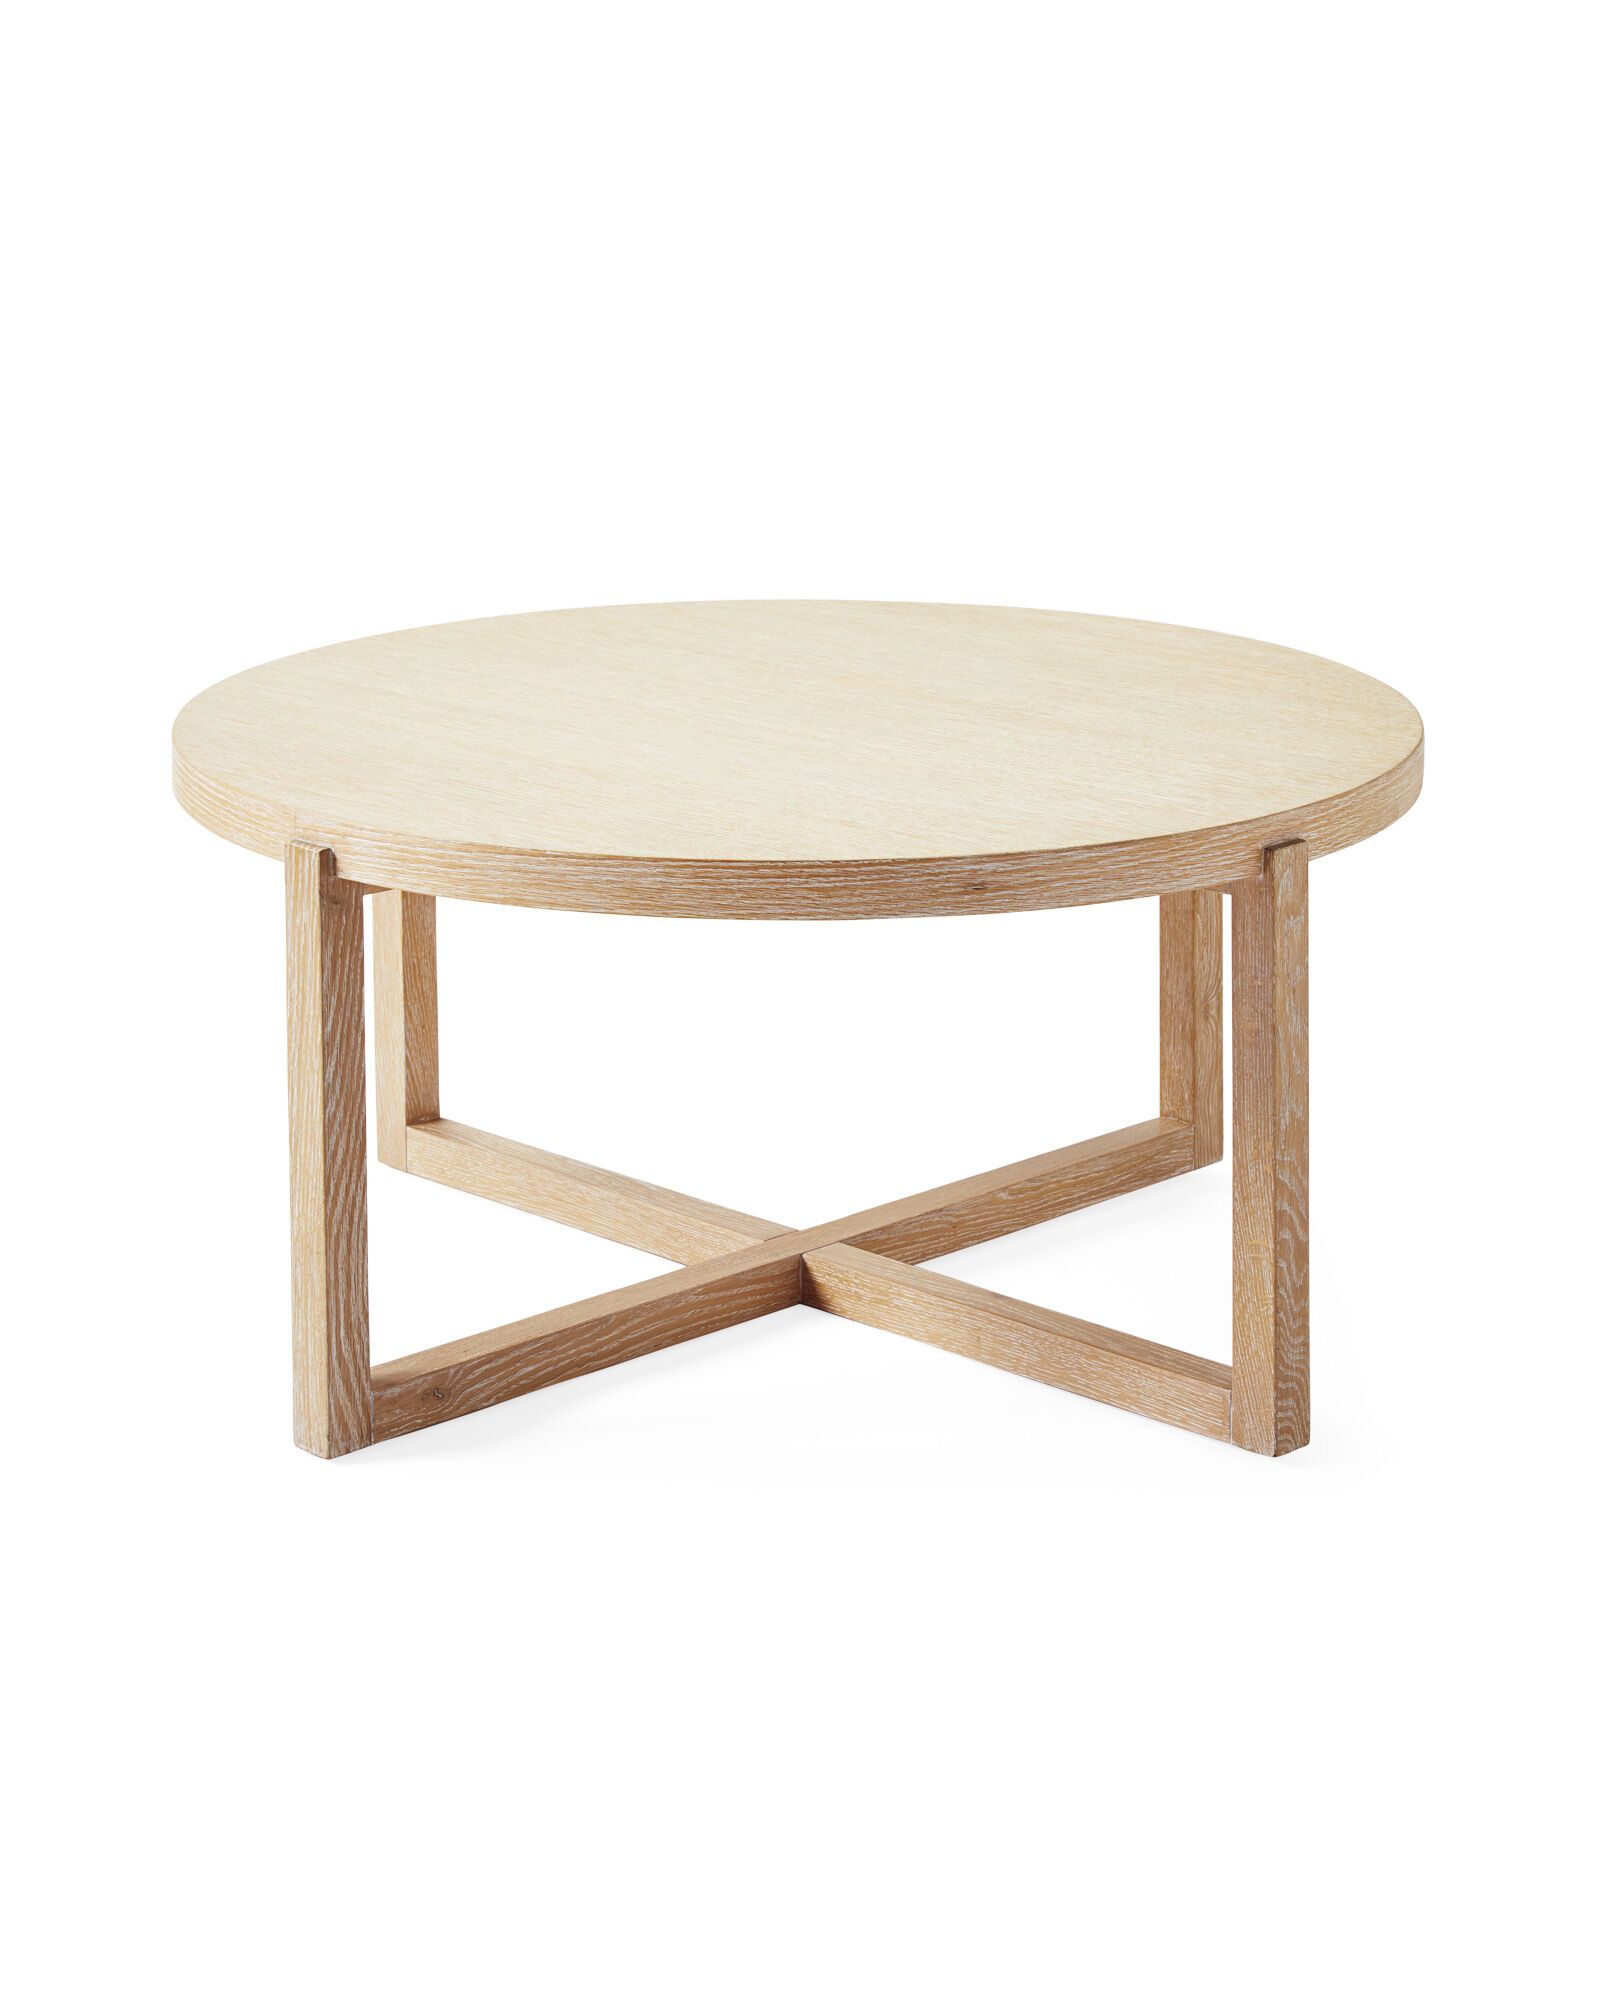 Clifton Coffee Table | Serena and Lily